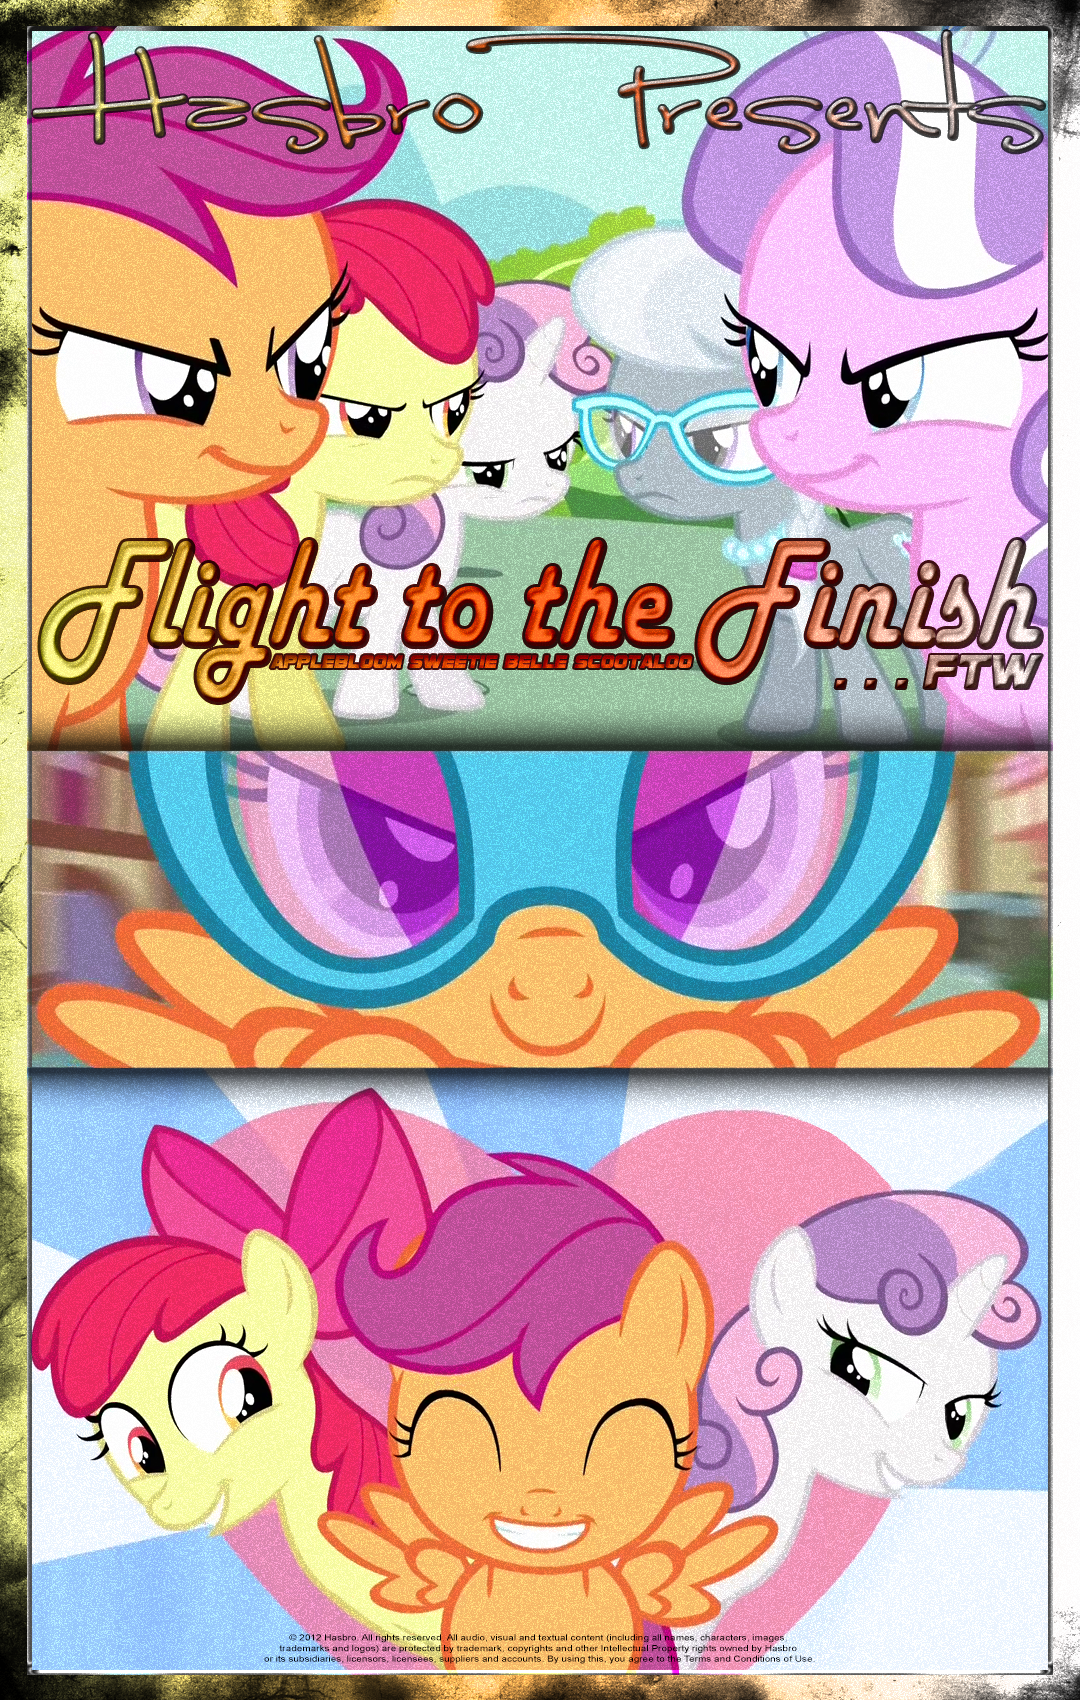 mlp___flight_to_the_finish___movie_poster_by_pims1978-d6xxtn5.png